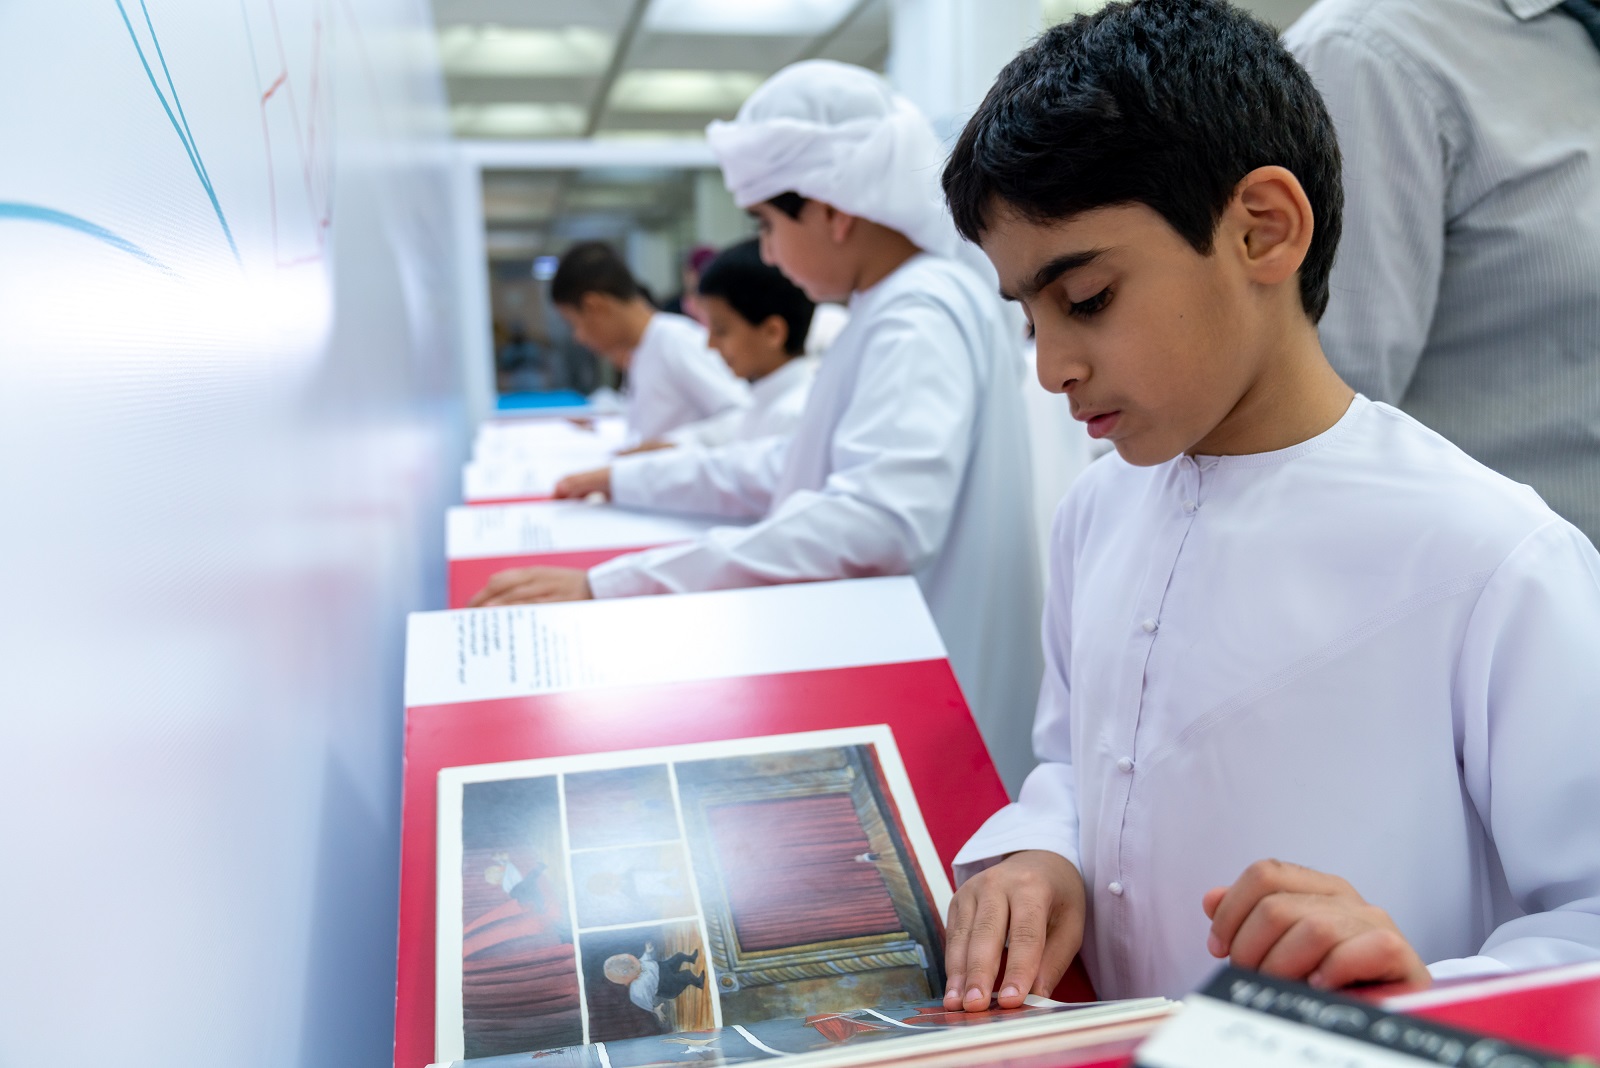 The Department Of Culture And Tourism – Abu Dhabi To Launch Packed Programme Of Events For National Month Of Reading